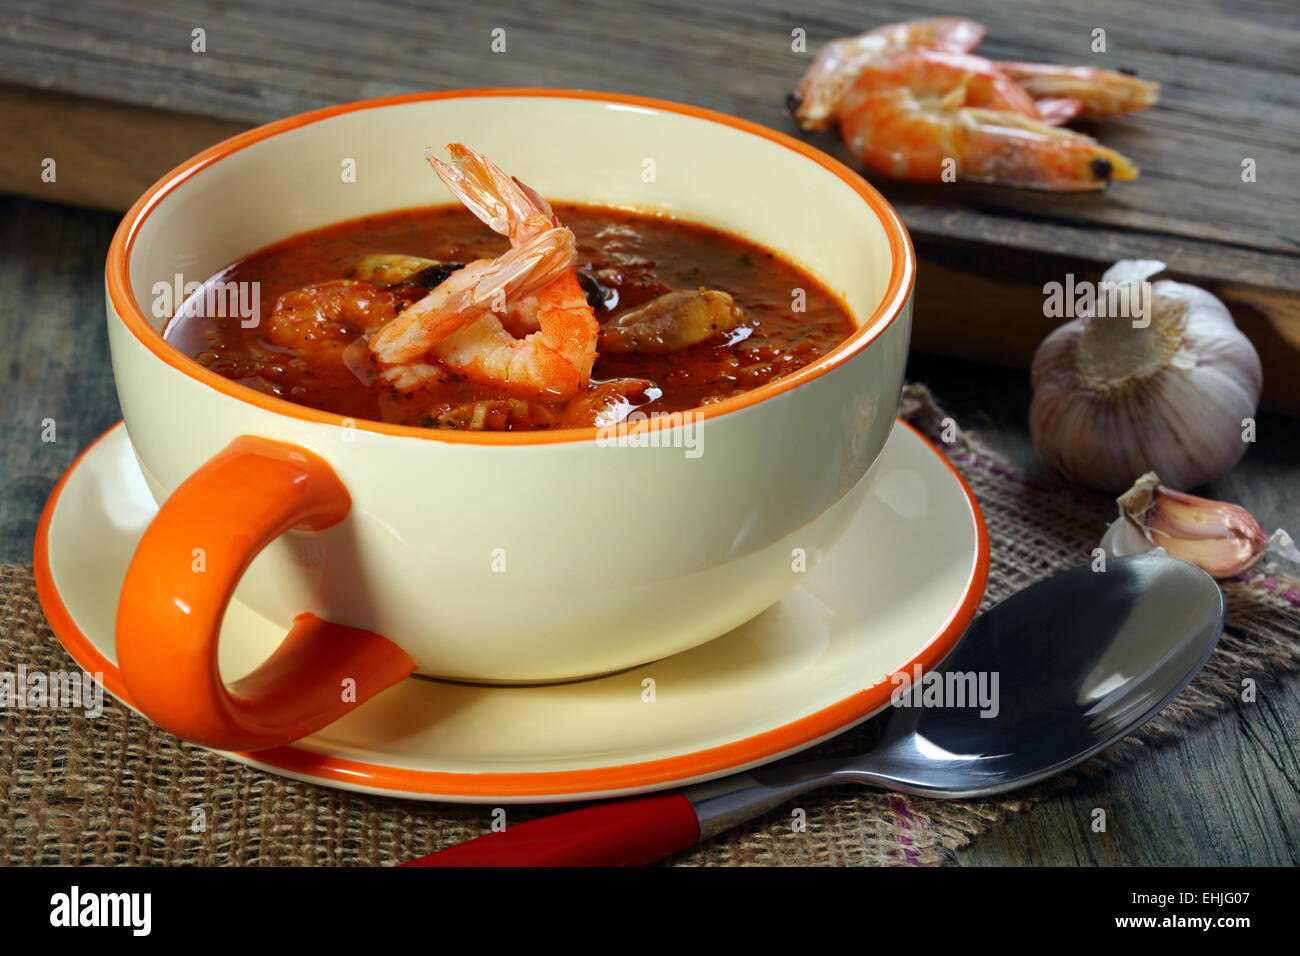 Tomato soup with mussels and shrimp. Stock Photo